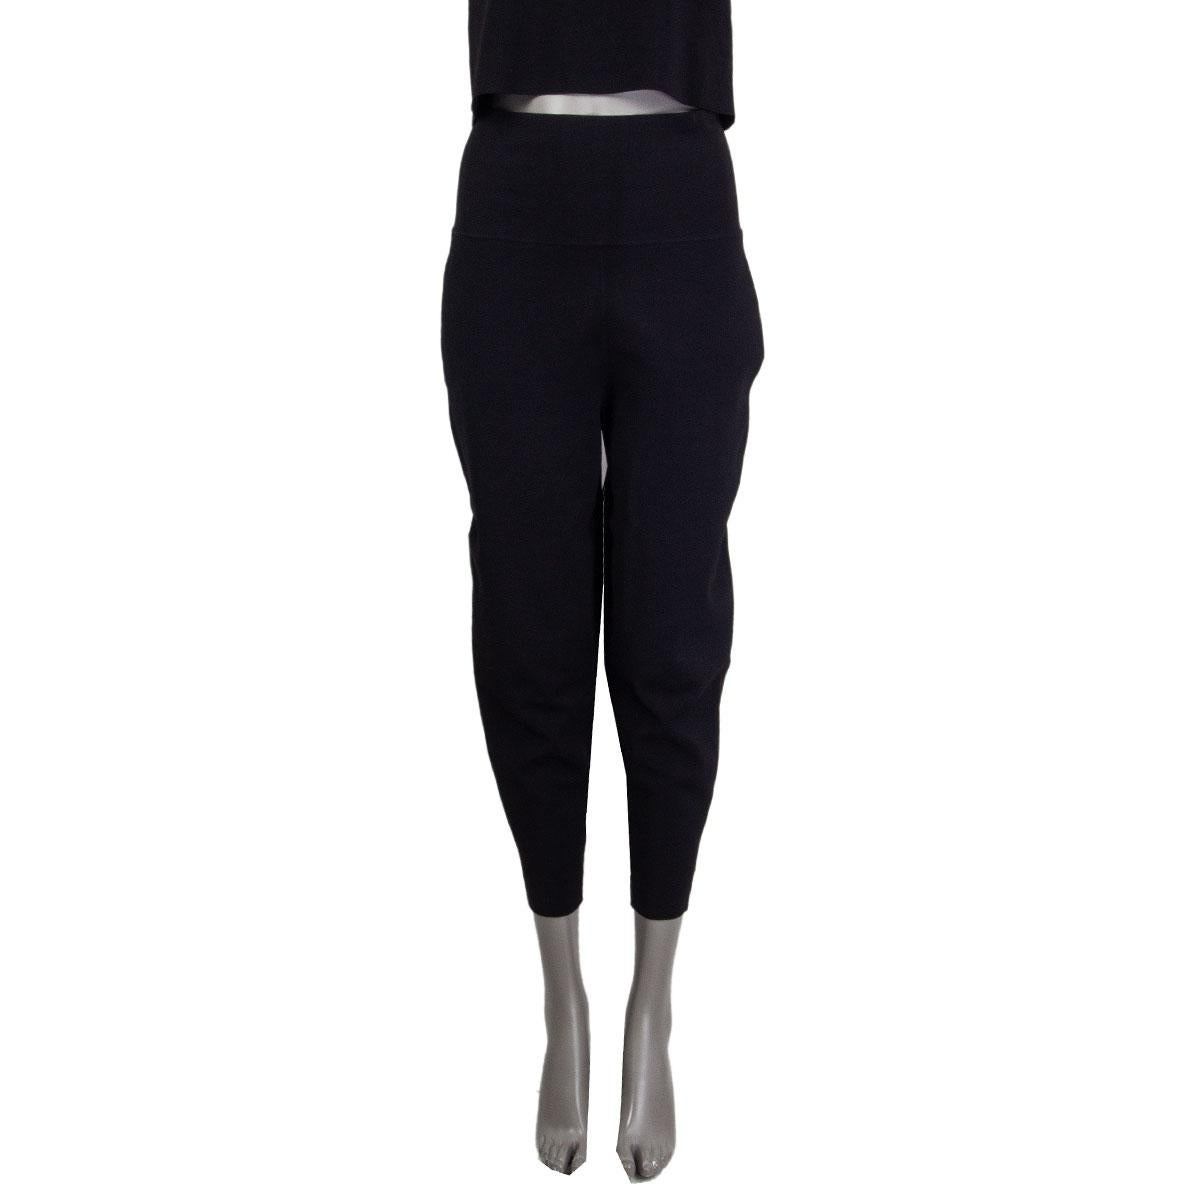 100% authentic Stella McCartney high-waist pants in black rayon (83%) polyester (17%) with a stretchy material, tapered legs and two side pockets. Has been worn and has a little stitching at the seam by the waist-band. Makes overall a great